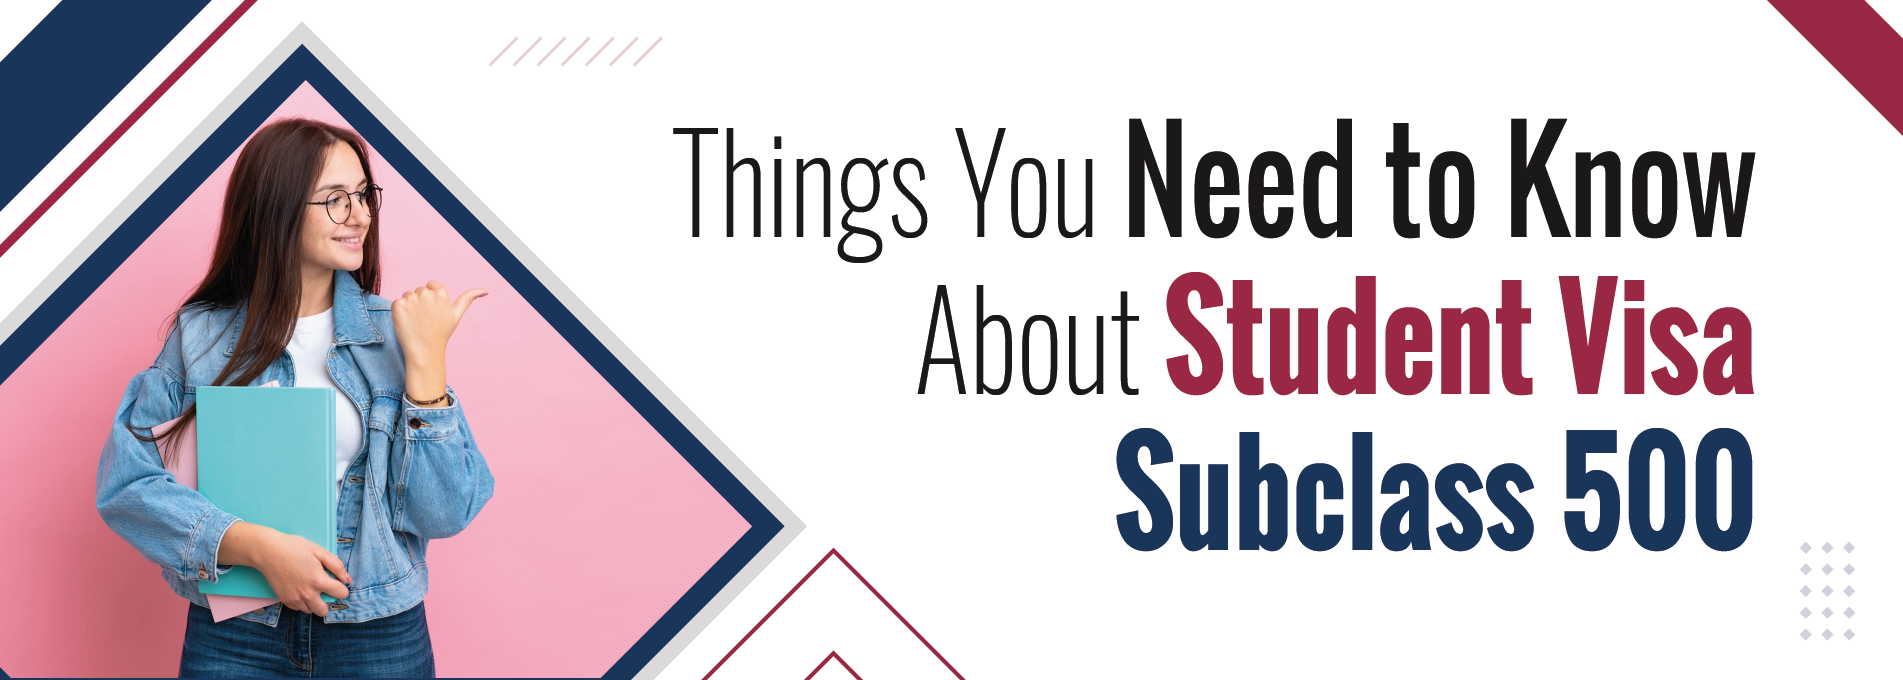 Things You Need to Know About Student Visa Subclass 500